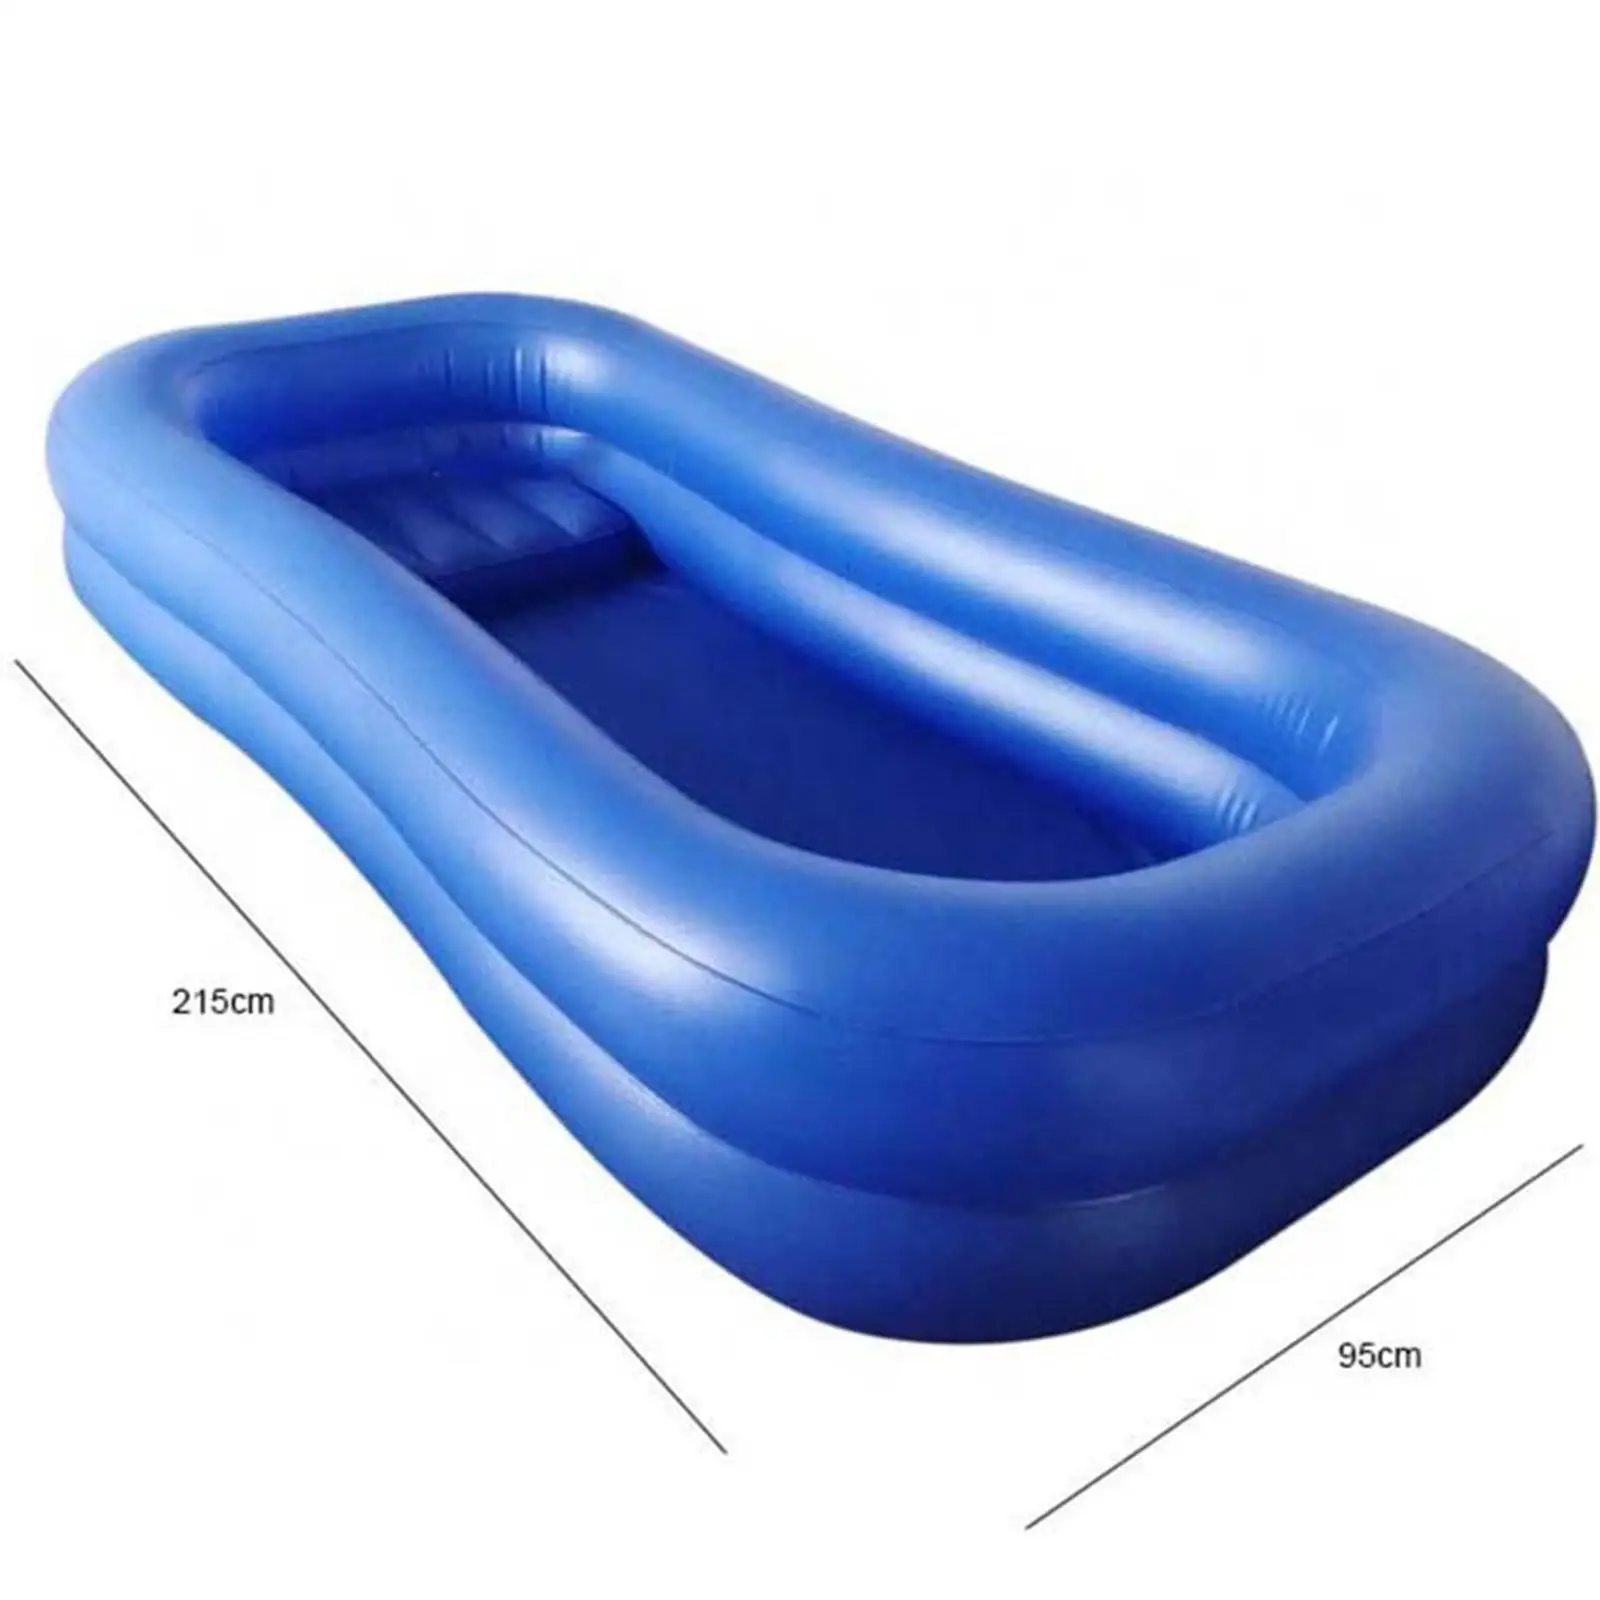 Inflatable Bathtub Foldable Comfortable Bath in Bed Body Washing Basin System for Bedridden Handicapped Disabled Adults Seniors